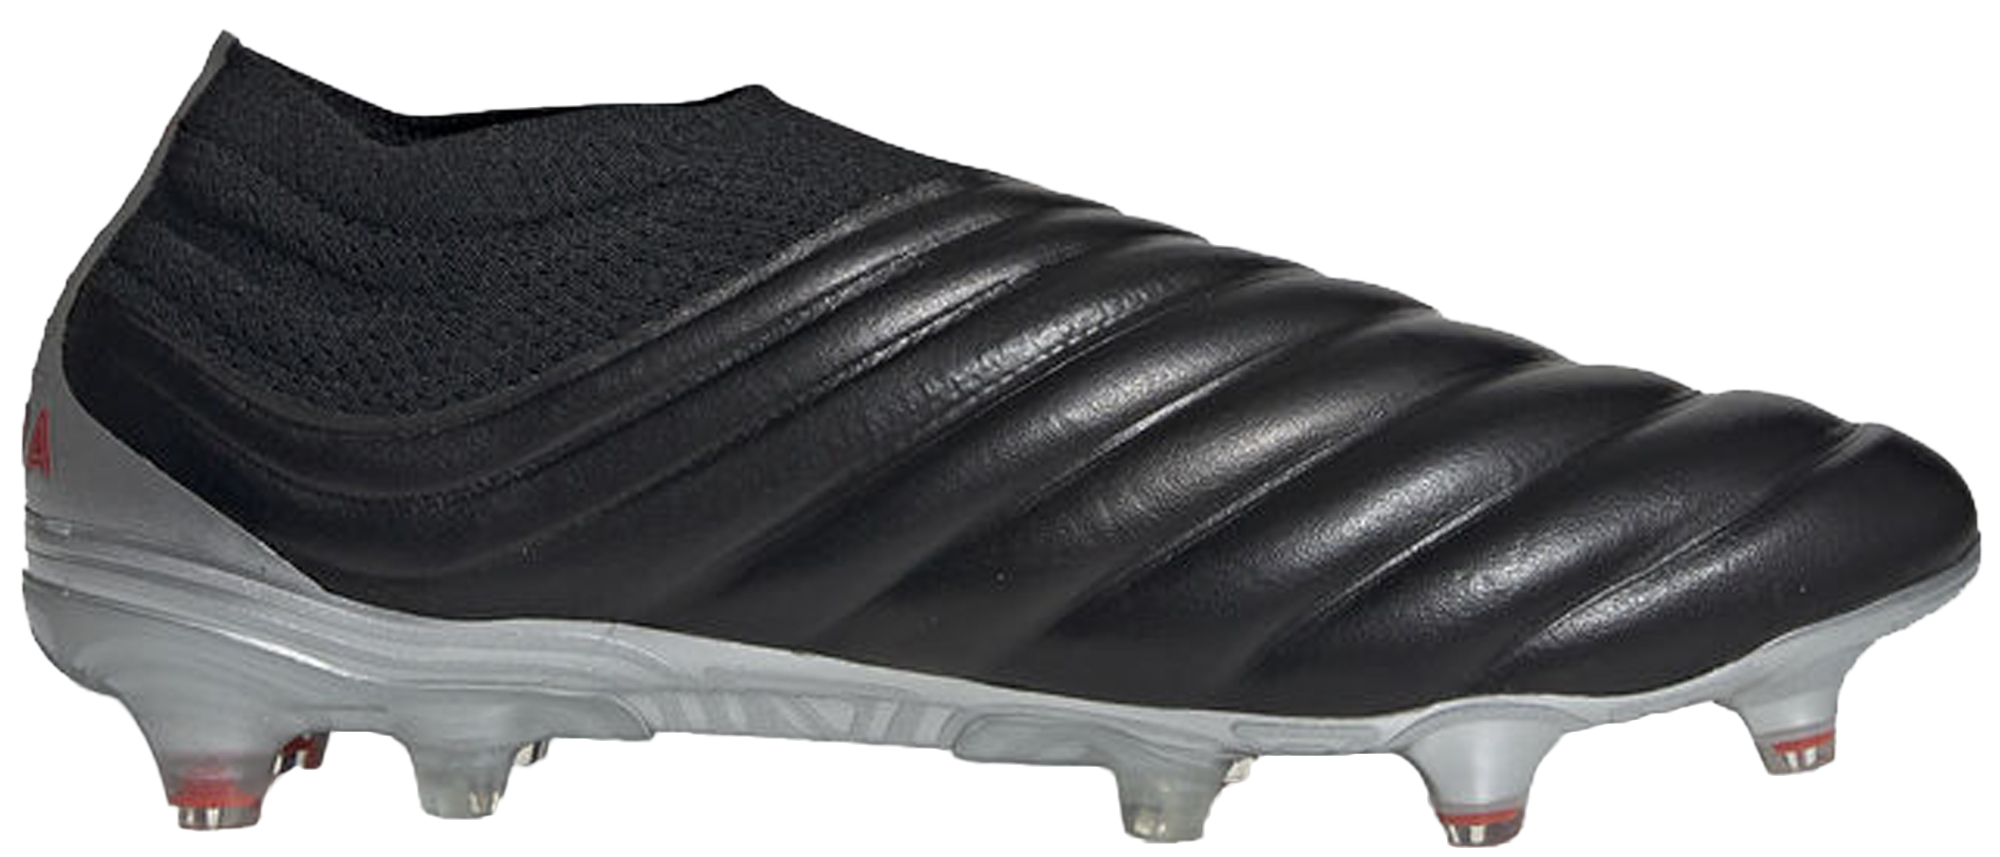 copa 19 firm ground cleats